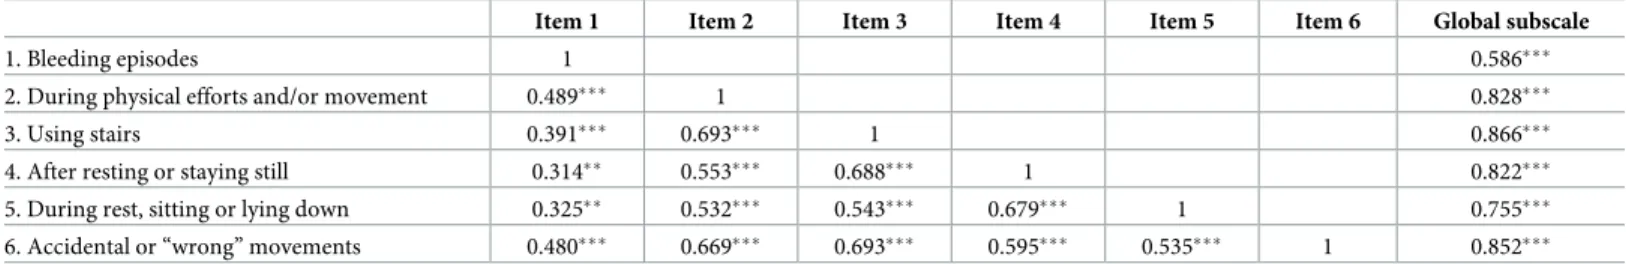 Table 10. Results of Pearson correlation tests for inter-item and item-total correlations of pain intensity.